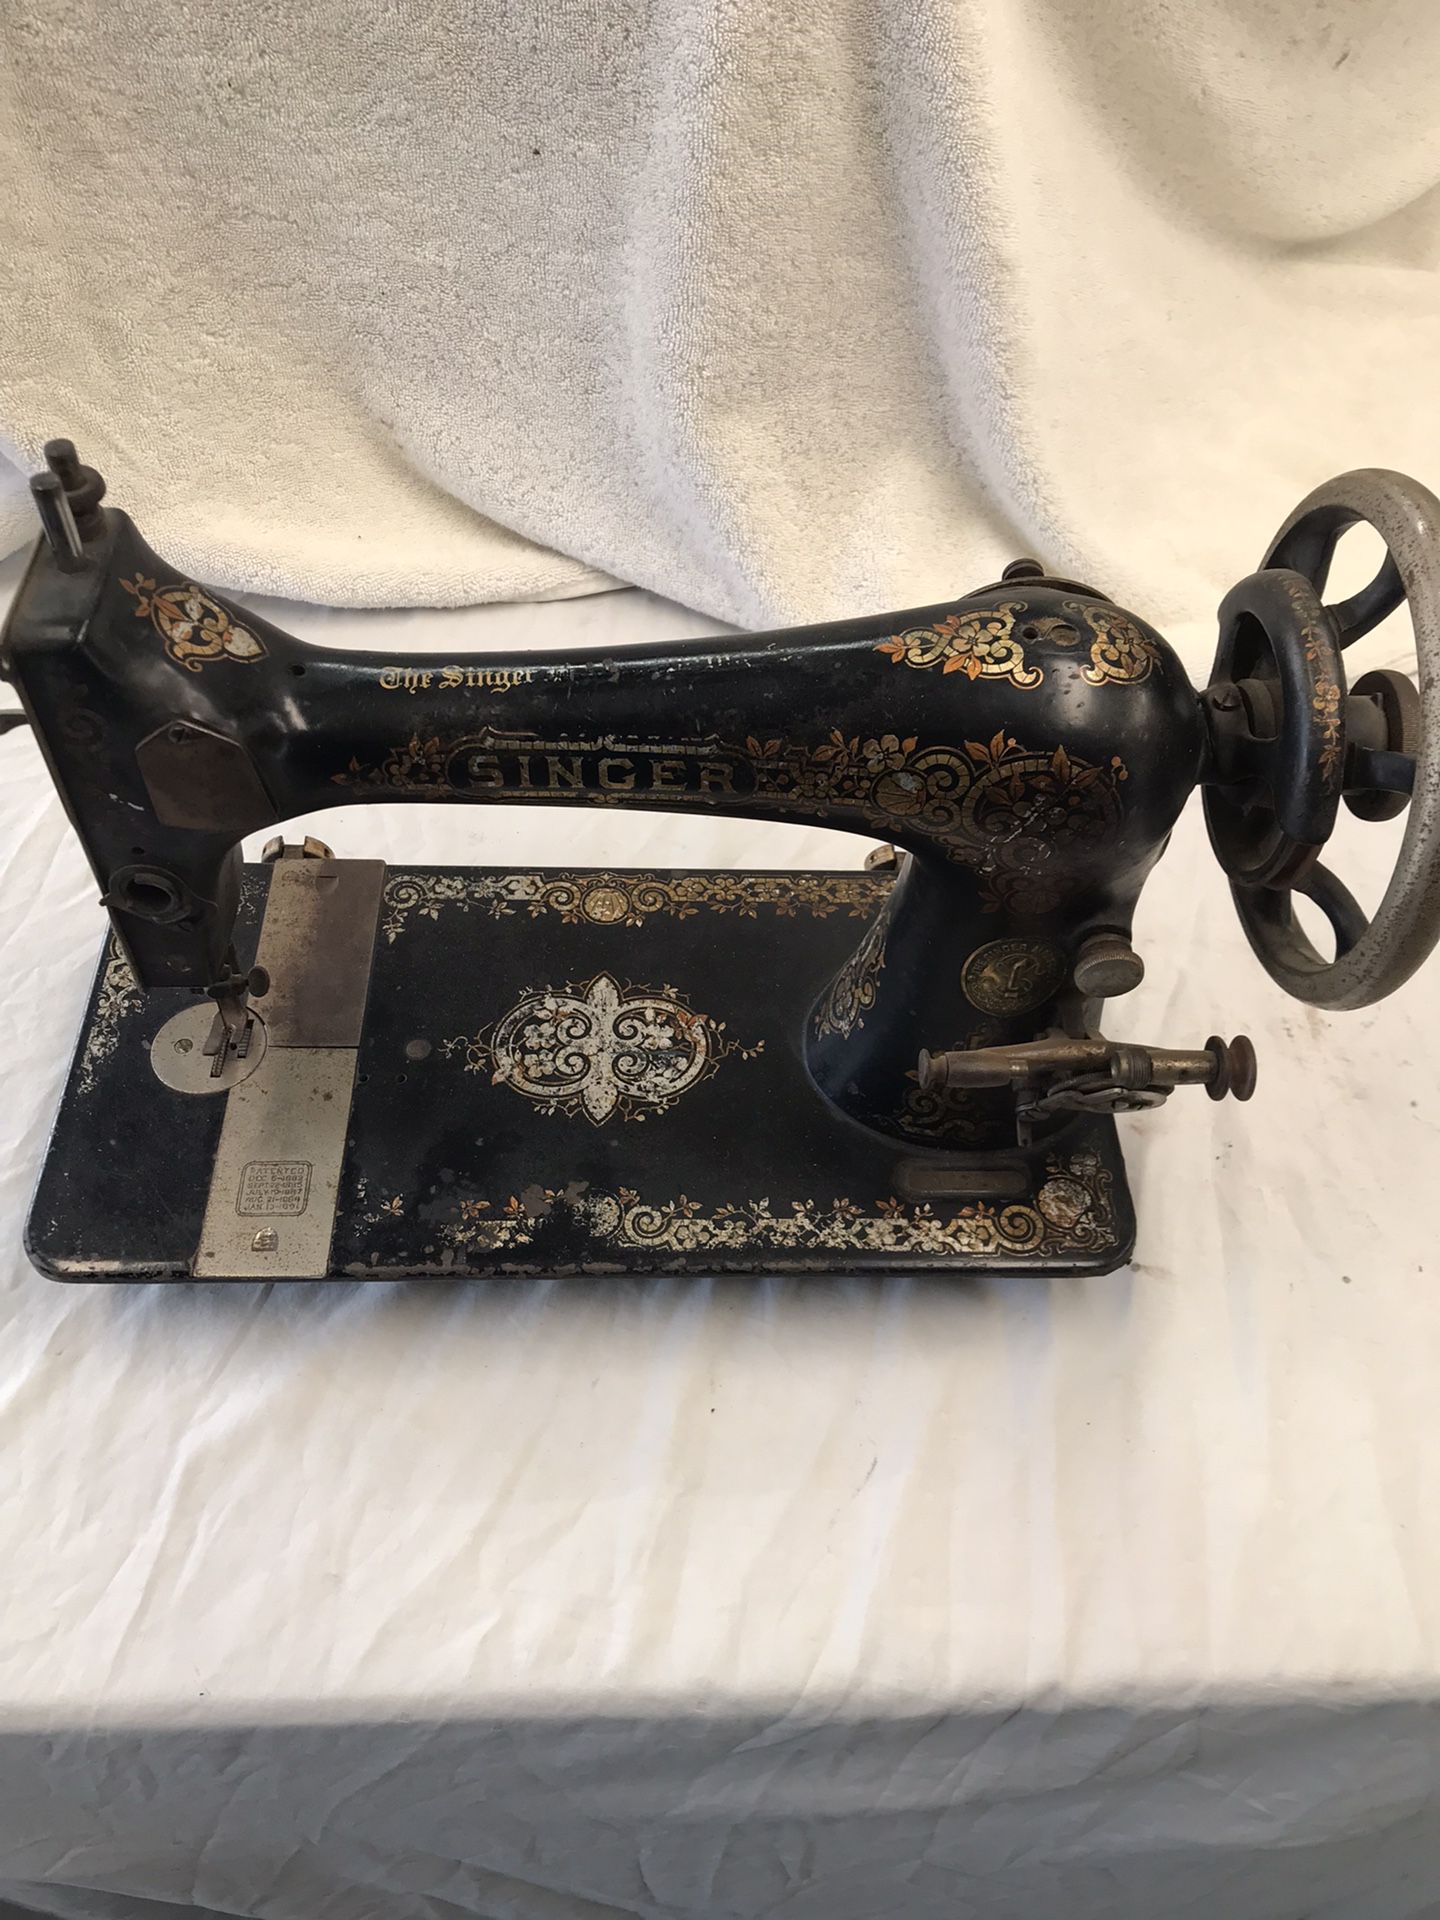 Singer Sewing Machine -made In 1900s